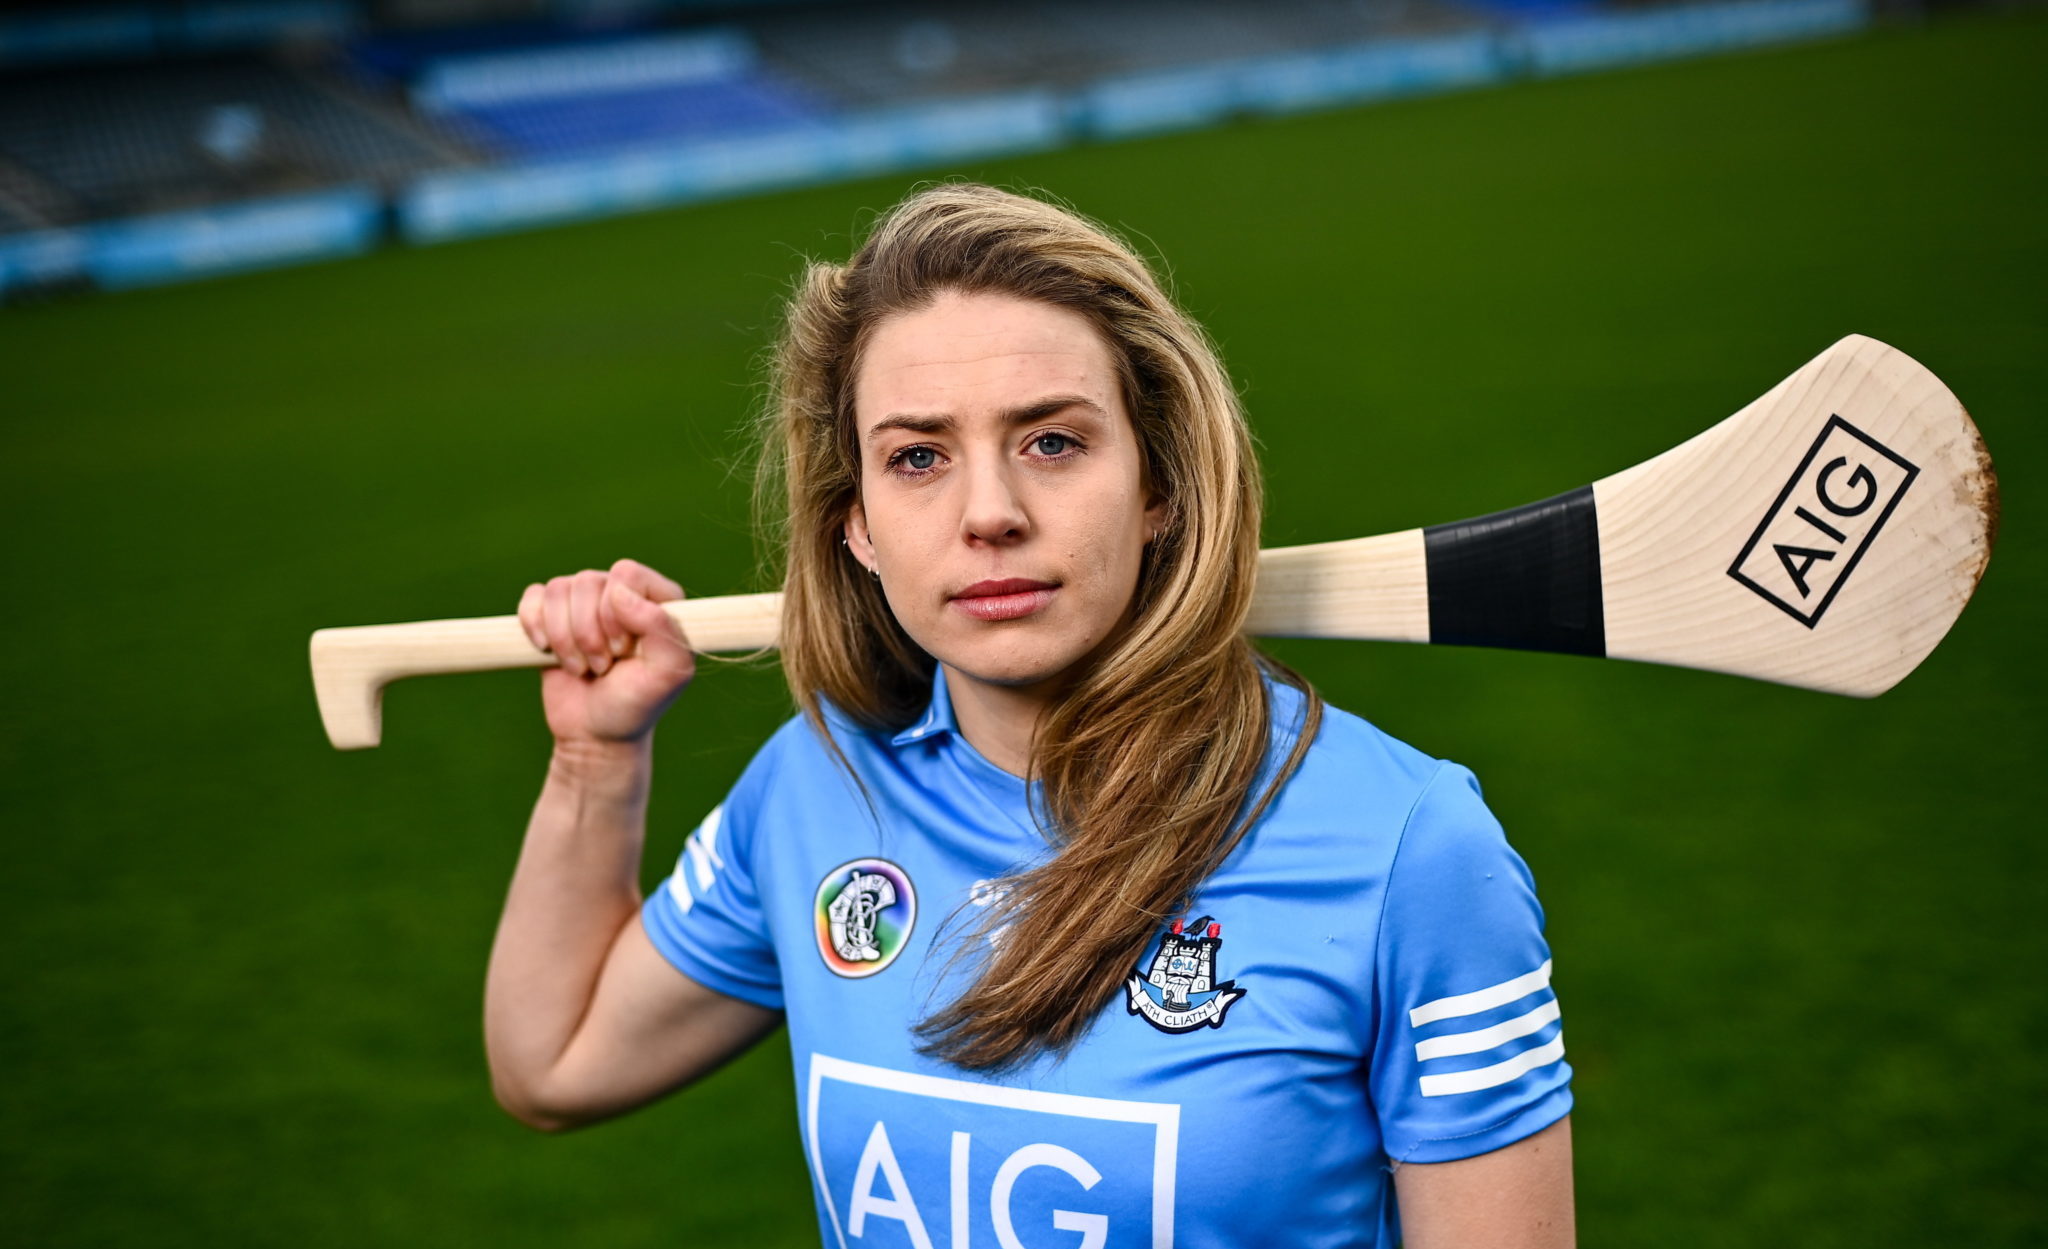 Dublin Camogie player Aisling Maher at the 2022 season launch. 